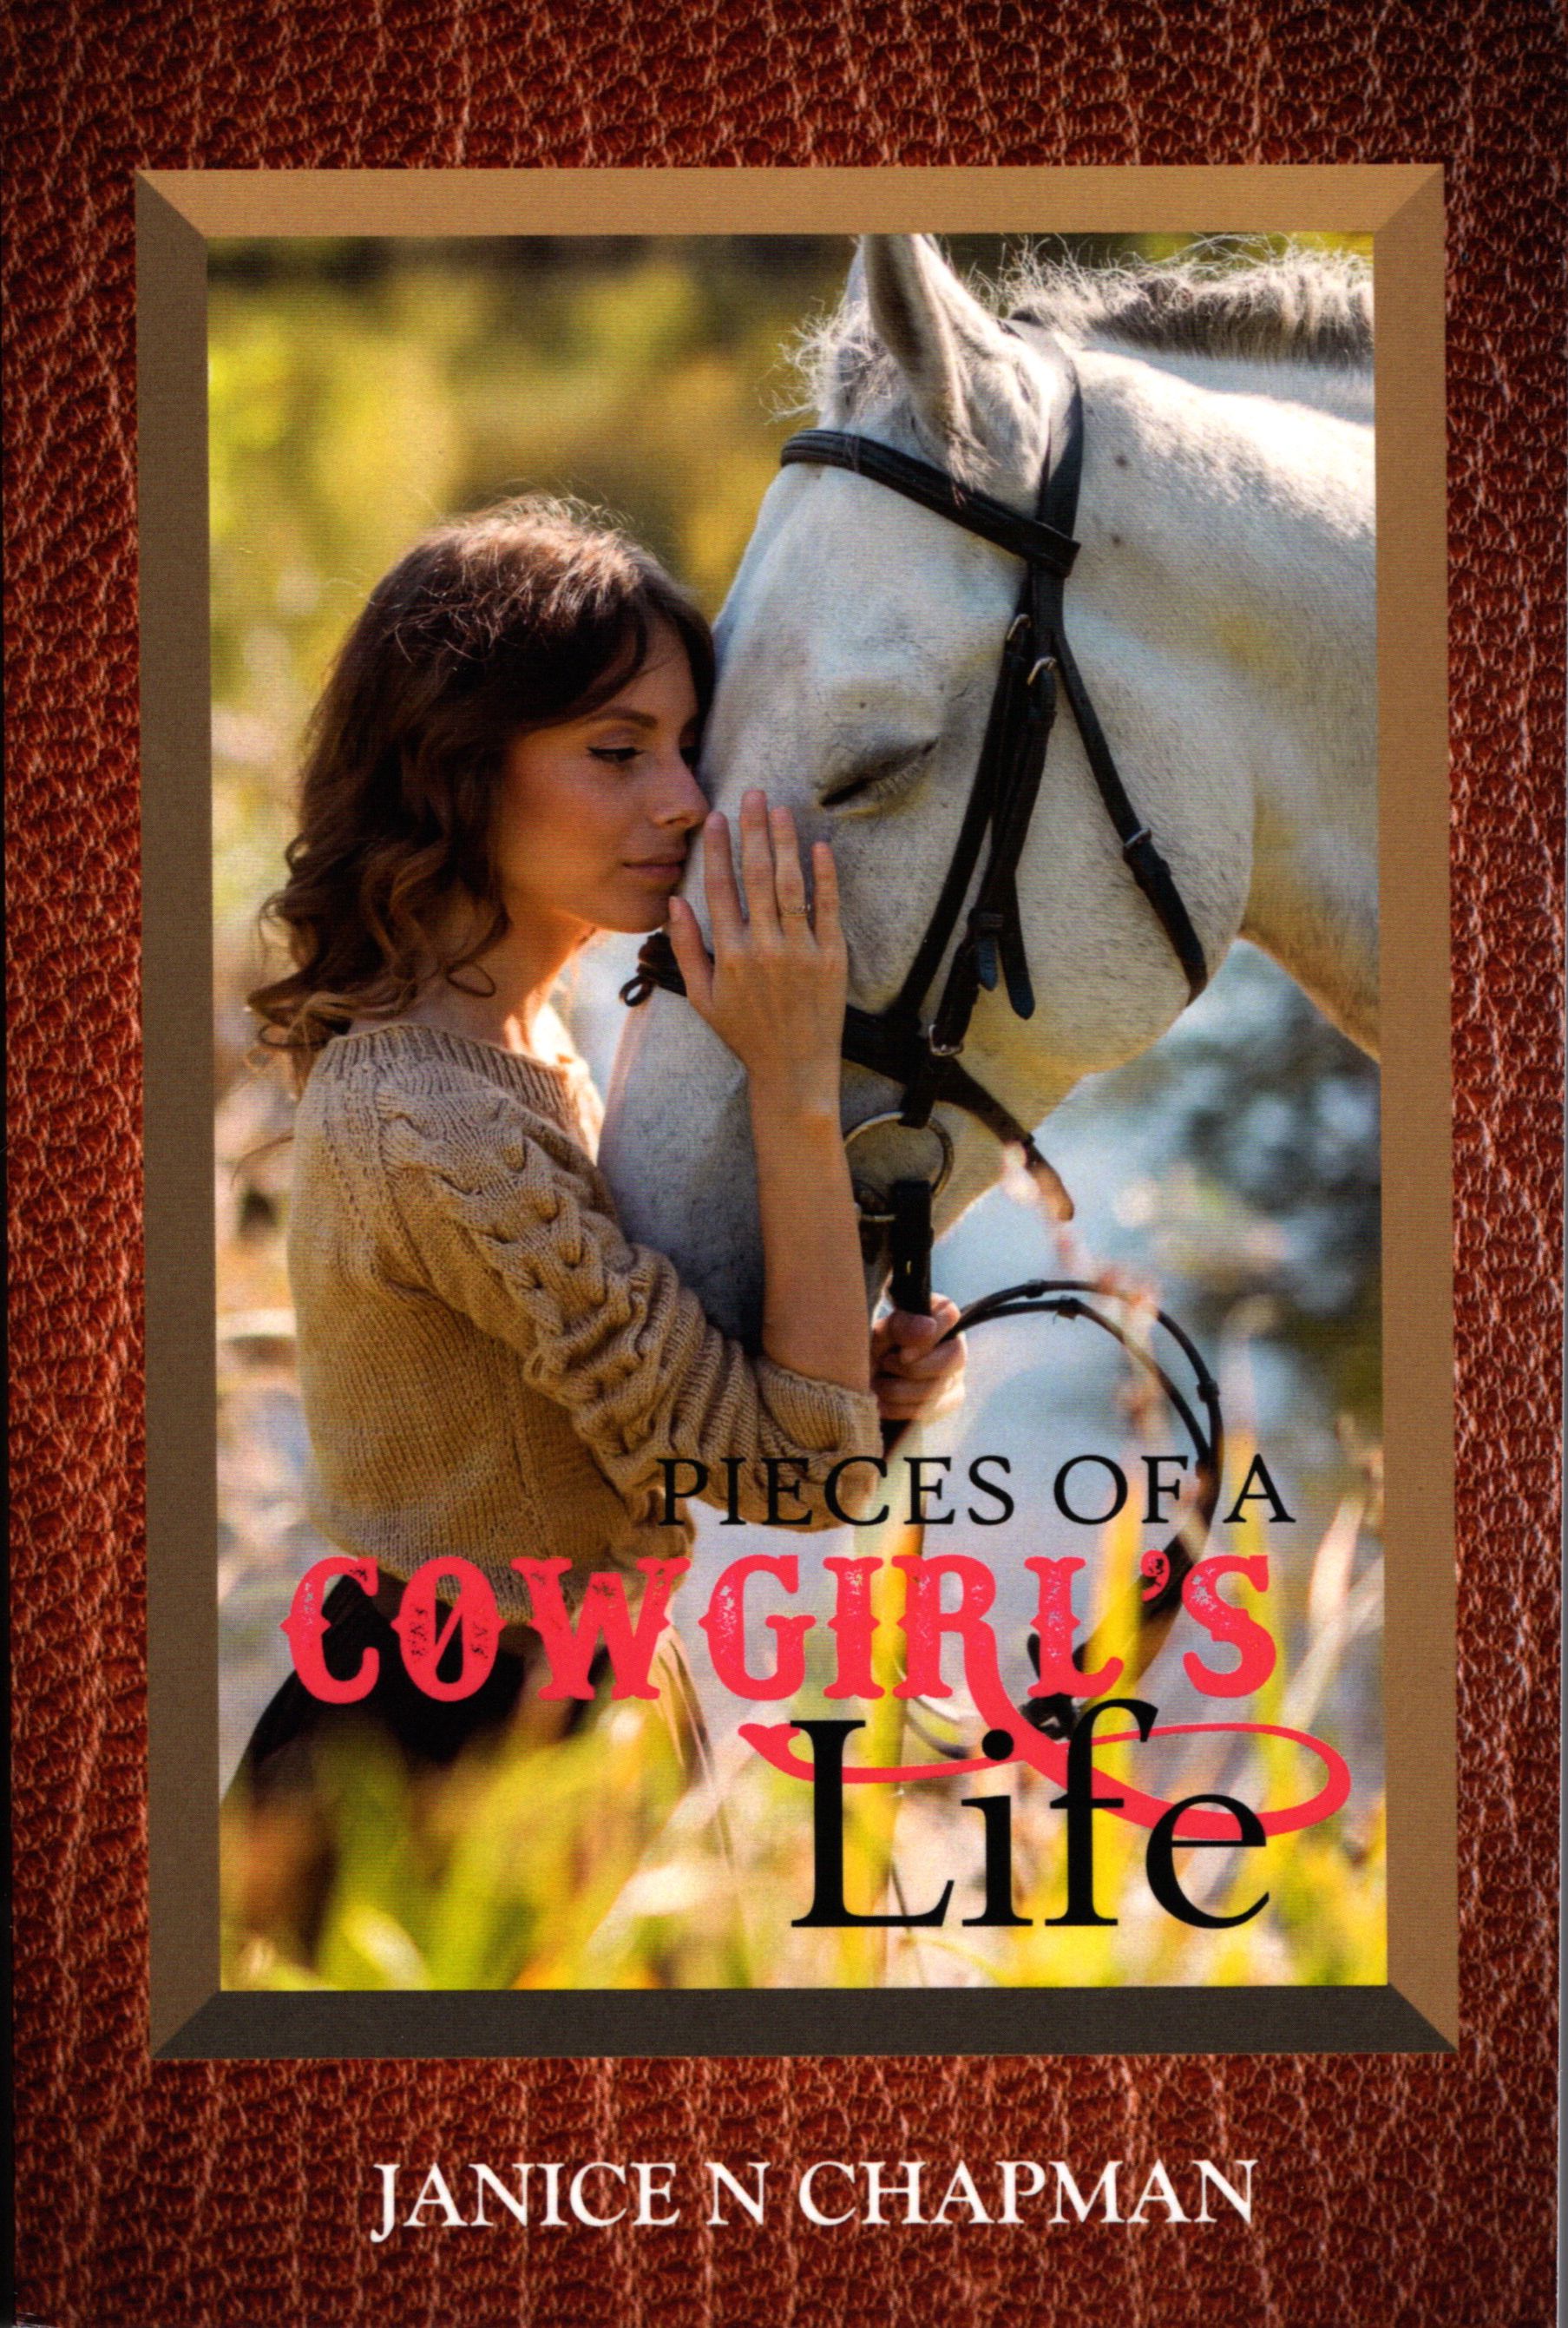 Pieces of a Cowgirl's Life